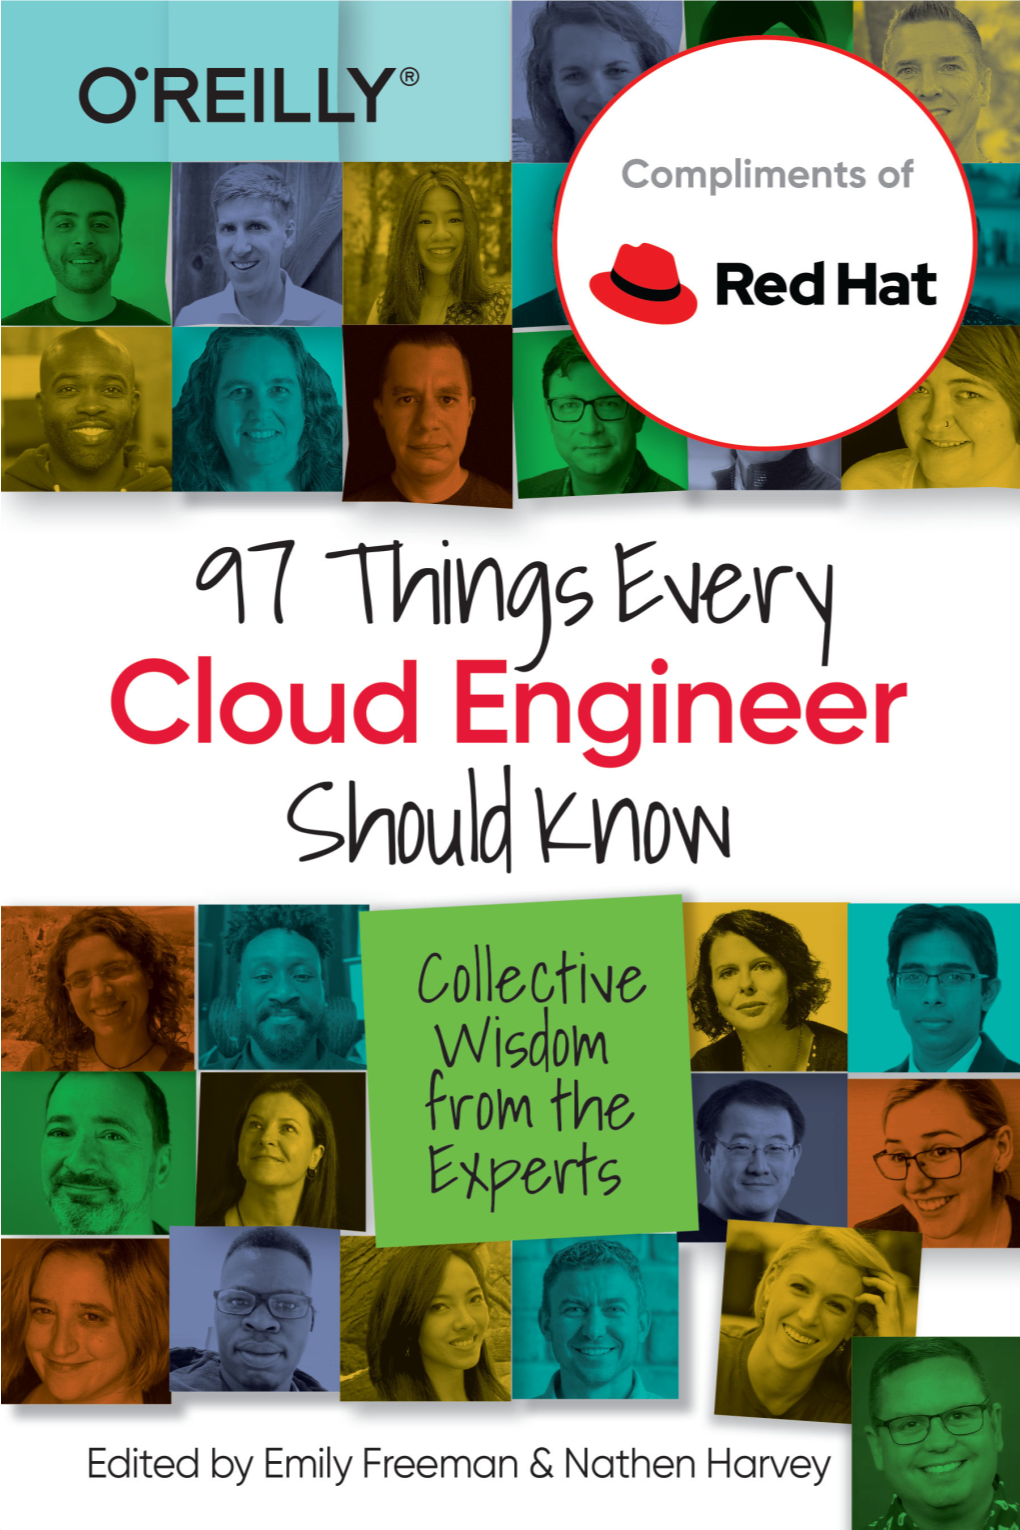 97 Things Every Cloud Engineer Should Know Collective Wisdom from the Experts